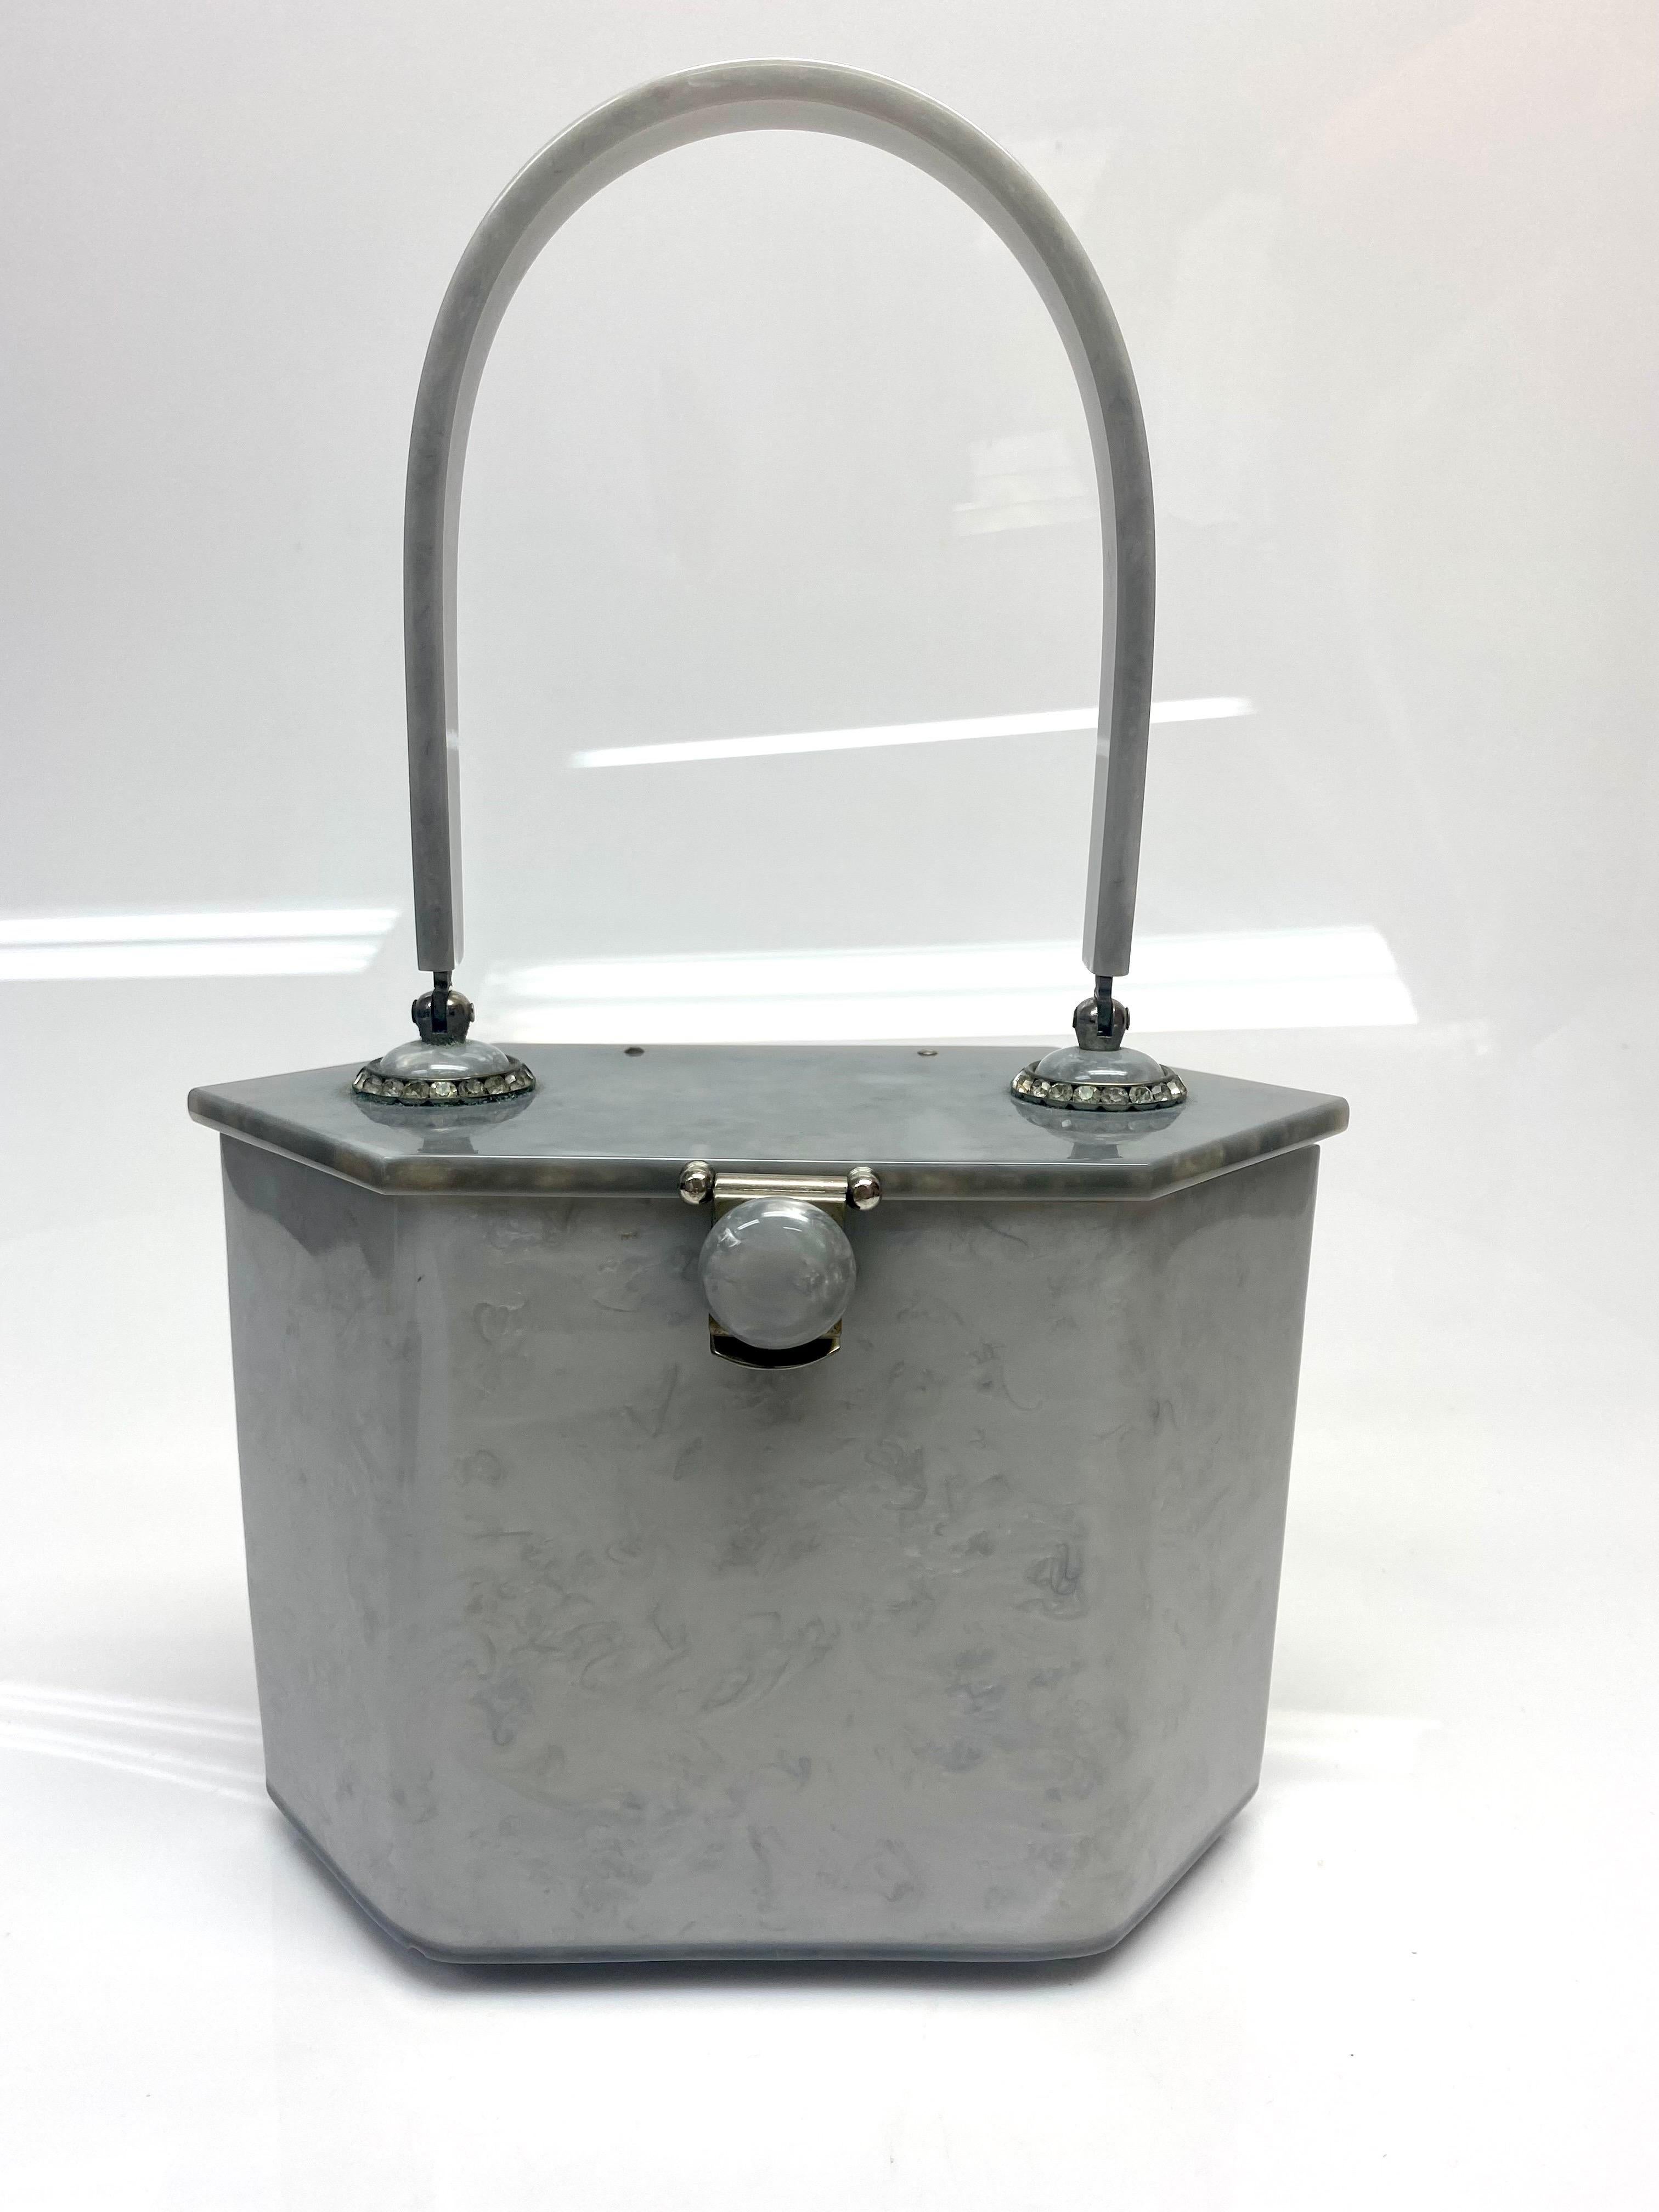 Rialto NY Grey Lucite Vintage Handbag. This Rialto NY 1950's Grey Handbag is a stunning piece to add to any bag collection. The handle has a rhinestone detail around the bottom where it attaches to the top of the handbag. This adorable vintage bag